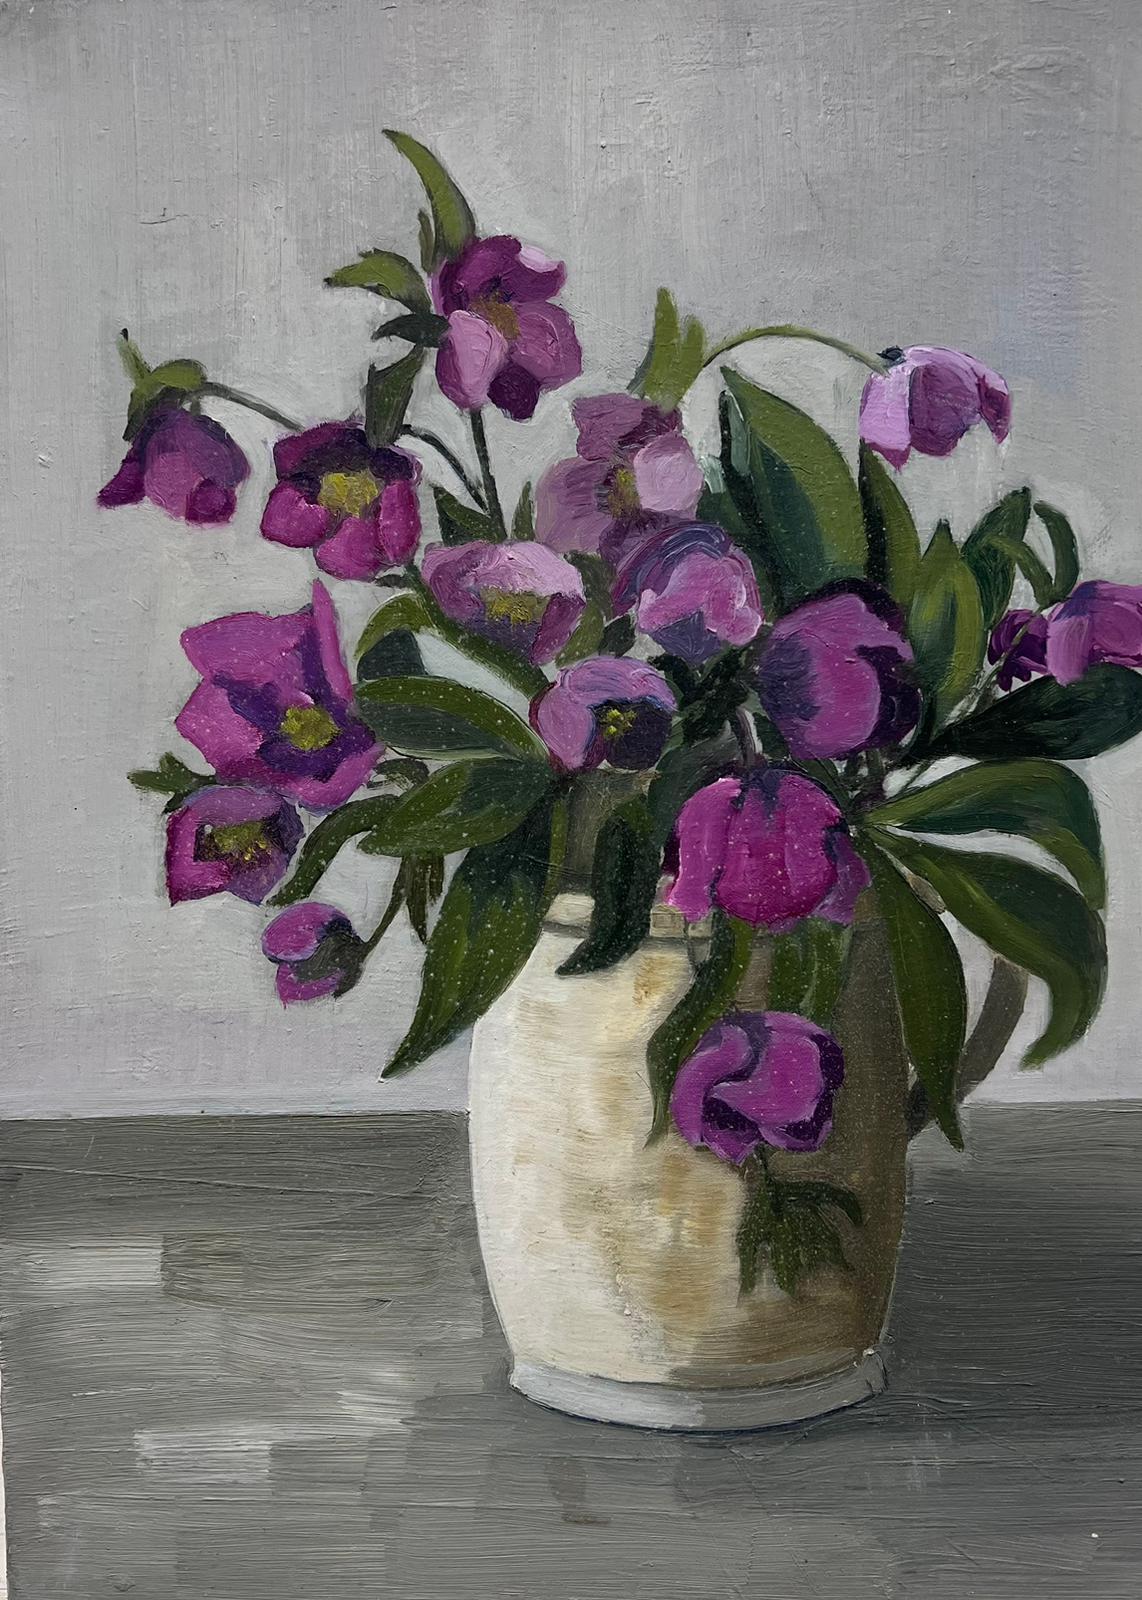 Purple African Violets
by Louise Alix (French, 1888-1980) *see notes below
provenance stamp to the back 
oil painting on canvas, unframed
measures: 18 high by 13 inches wide
condition: overall very good and sound, a few scuffs and marks to the